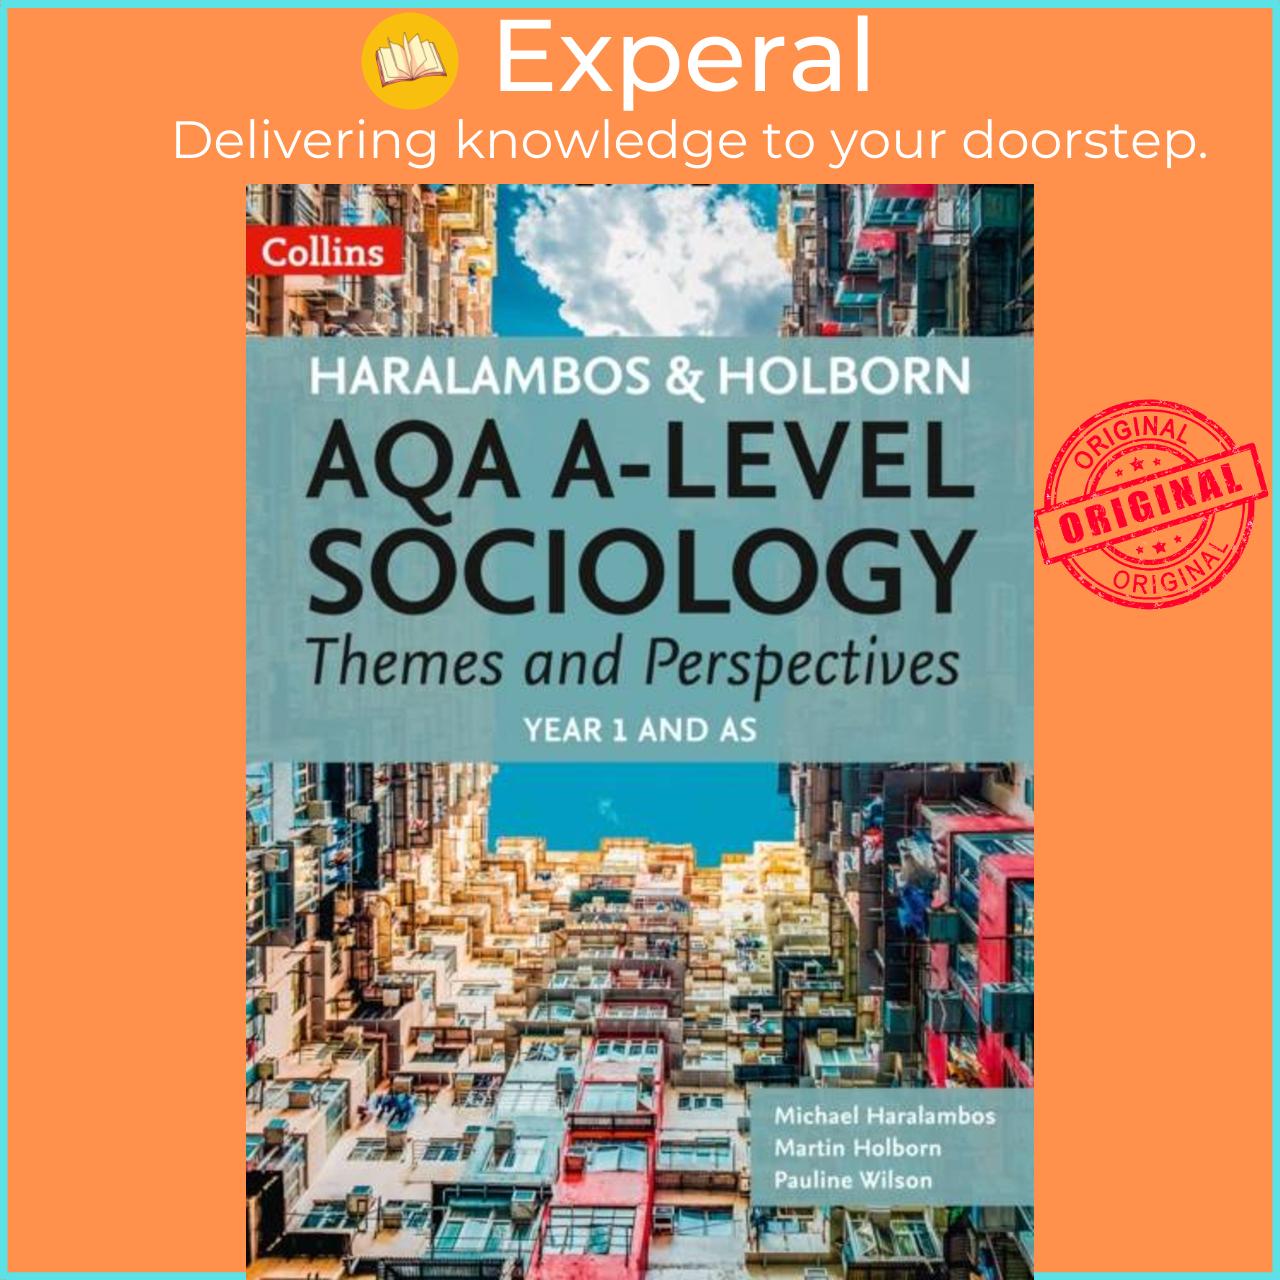 Sách - AQA A Level Sociology Themes and Perspectives - Year 1 and as by Michael Haralambos (UK edition, paperback)